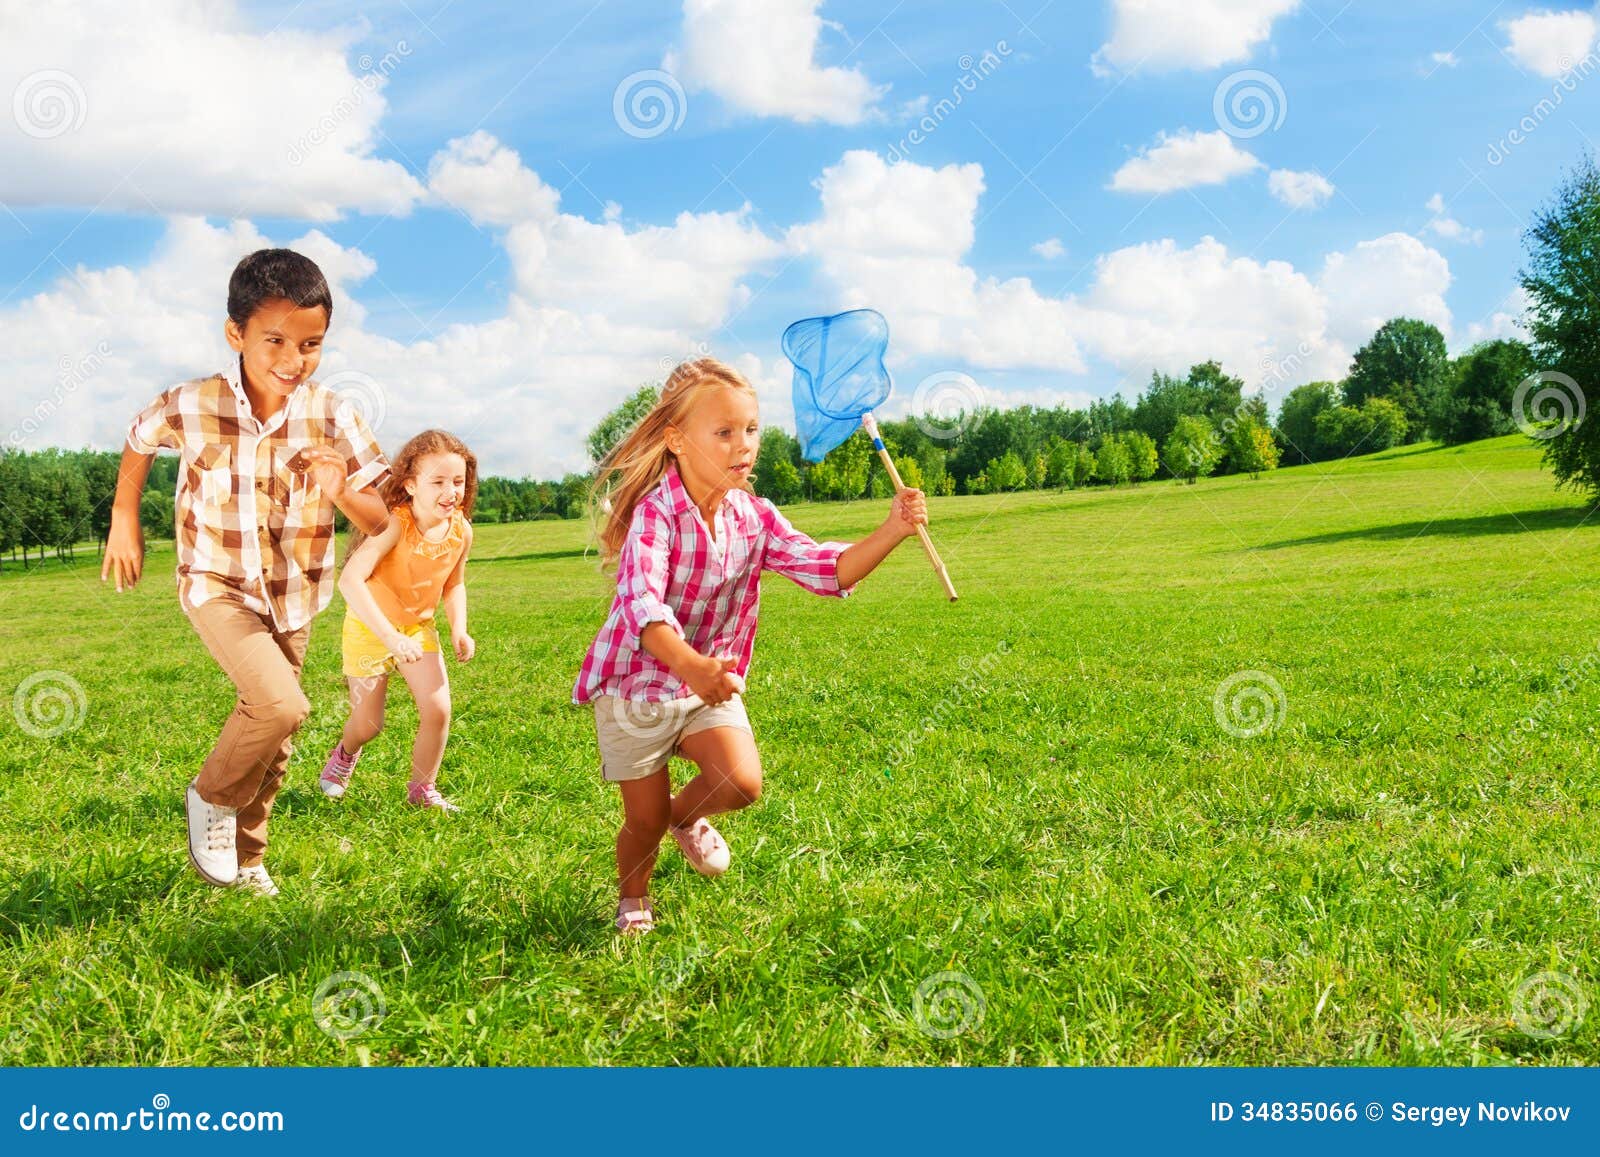 https://thumbs.dreamstime.com/z/kids-running-butterfly-net-three-happy-chasing-park-together-boys-girls-34835066.jpg